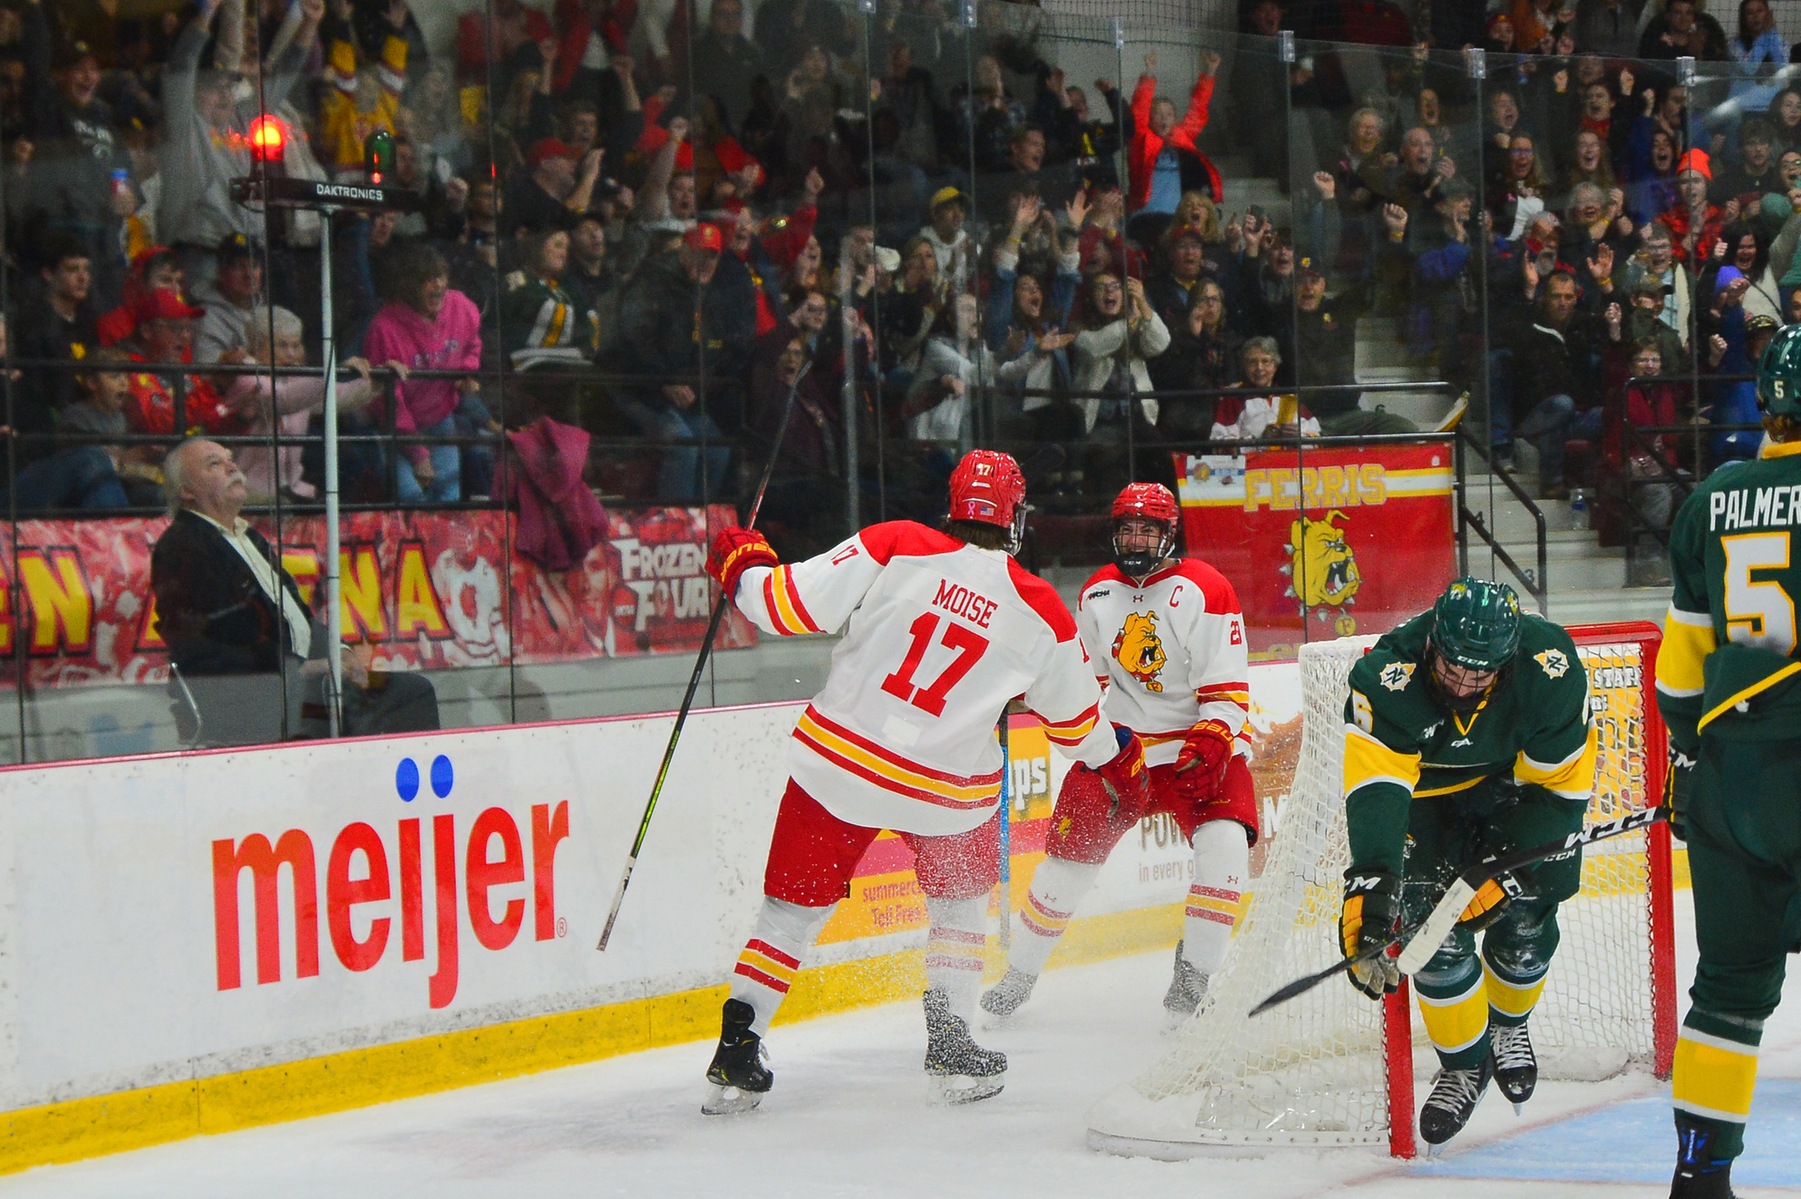 Ferris State Hosts Military Appreciation And Meijer Family Night This Weekend Versus Bemidji State